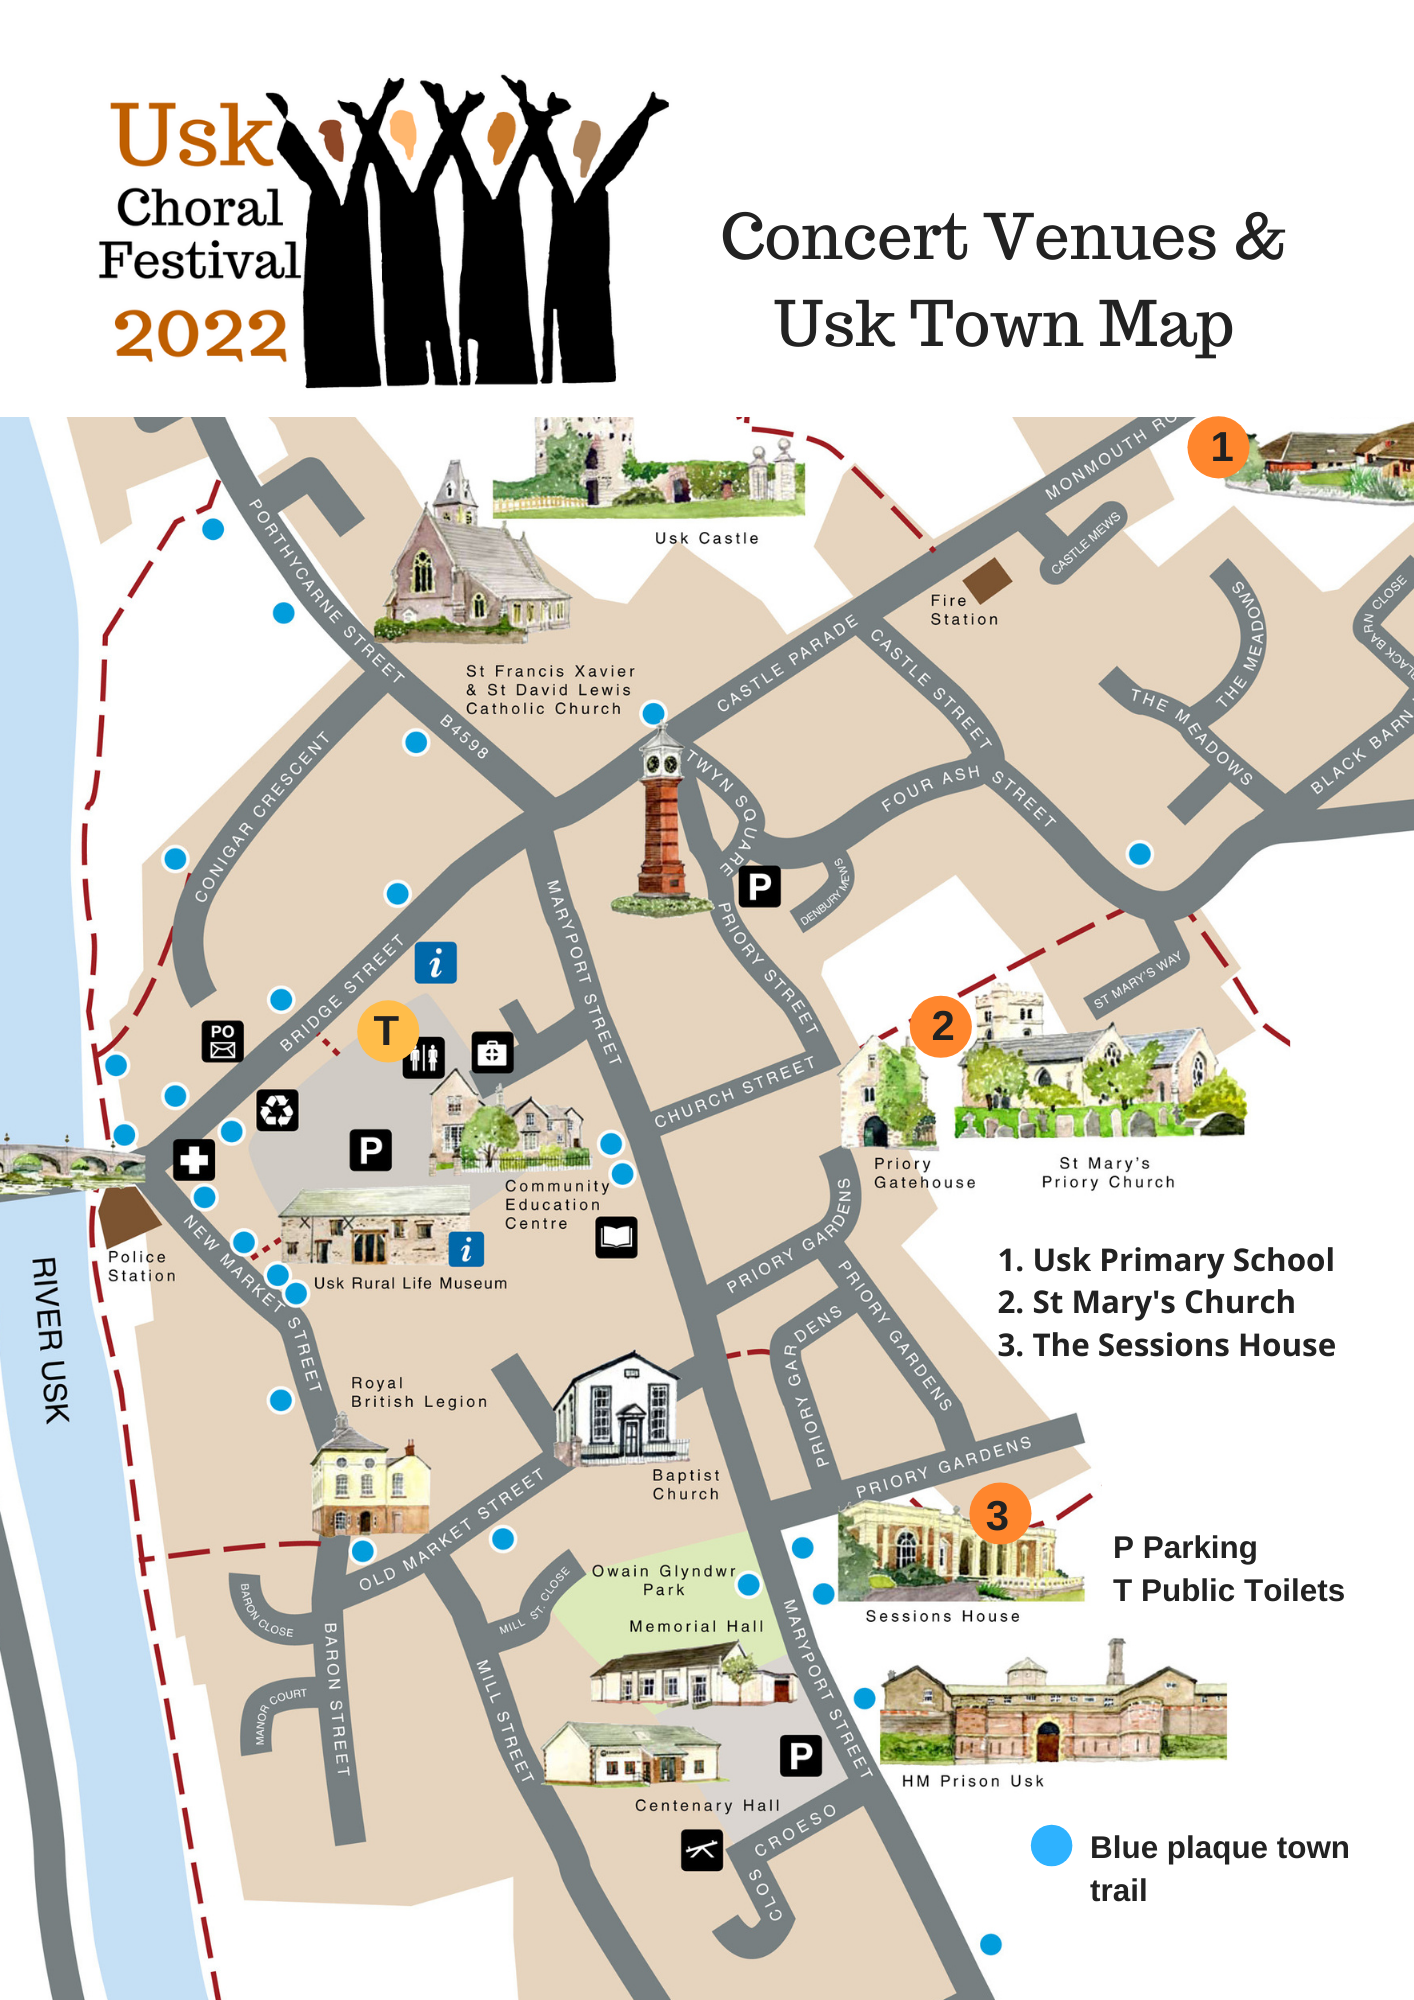 Usk Choral Festival 2022 Concert Venues and Town Map